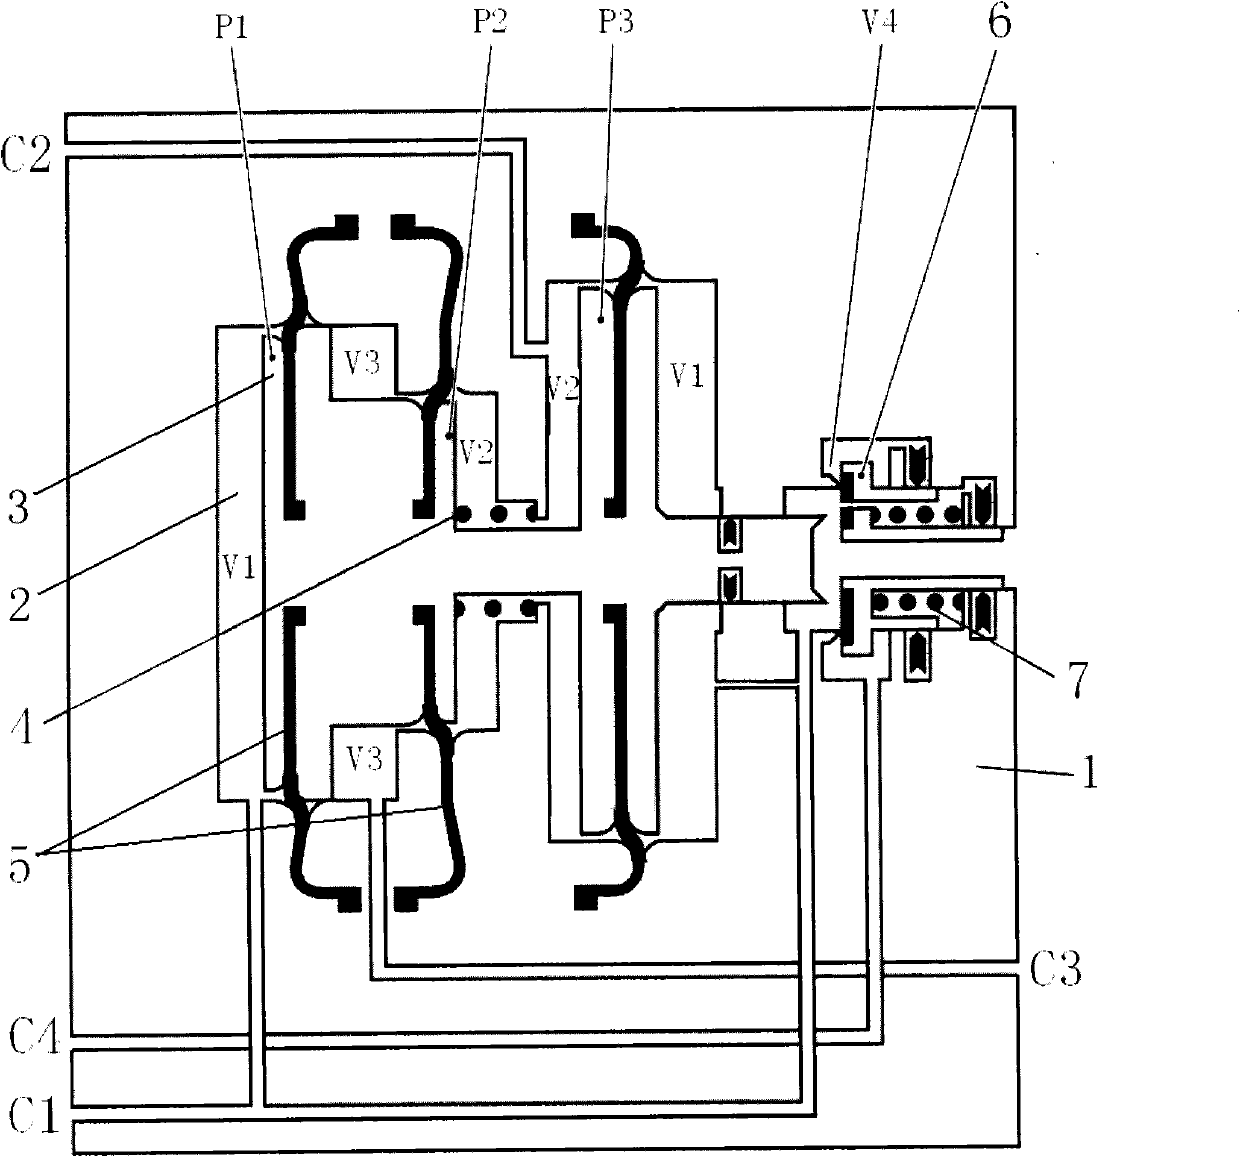 Relay valve for brake system of high-speed train